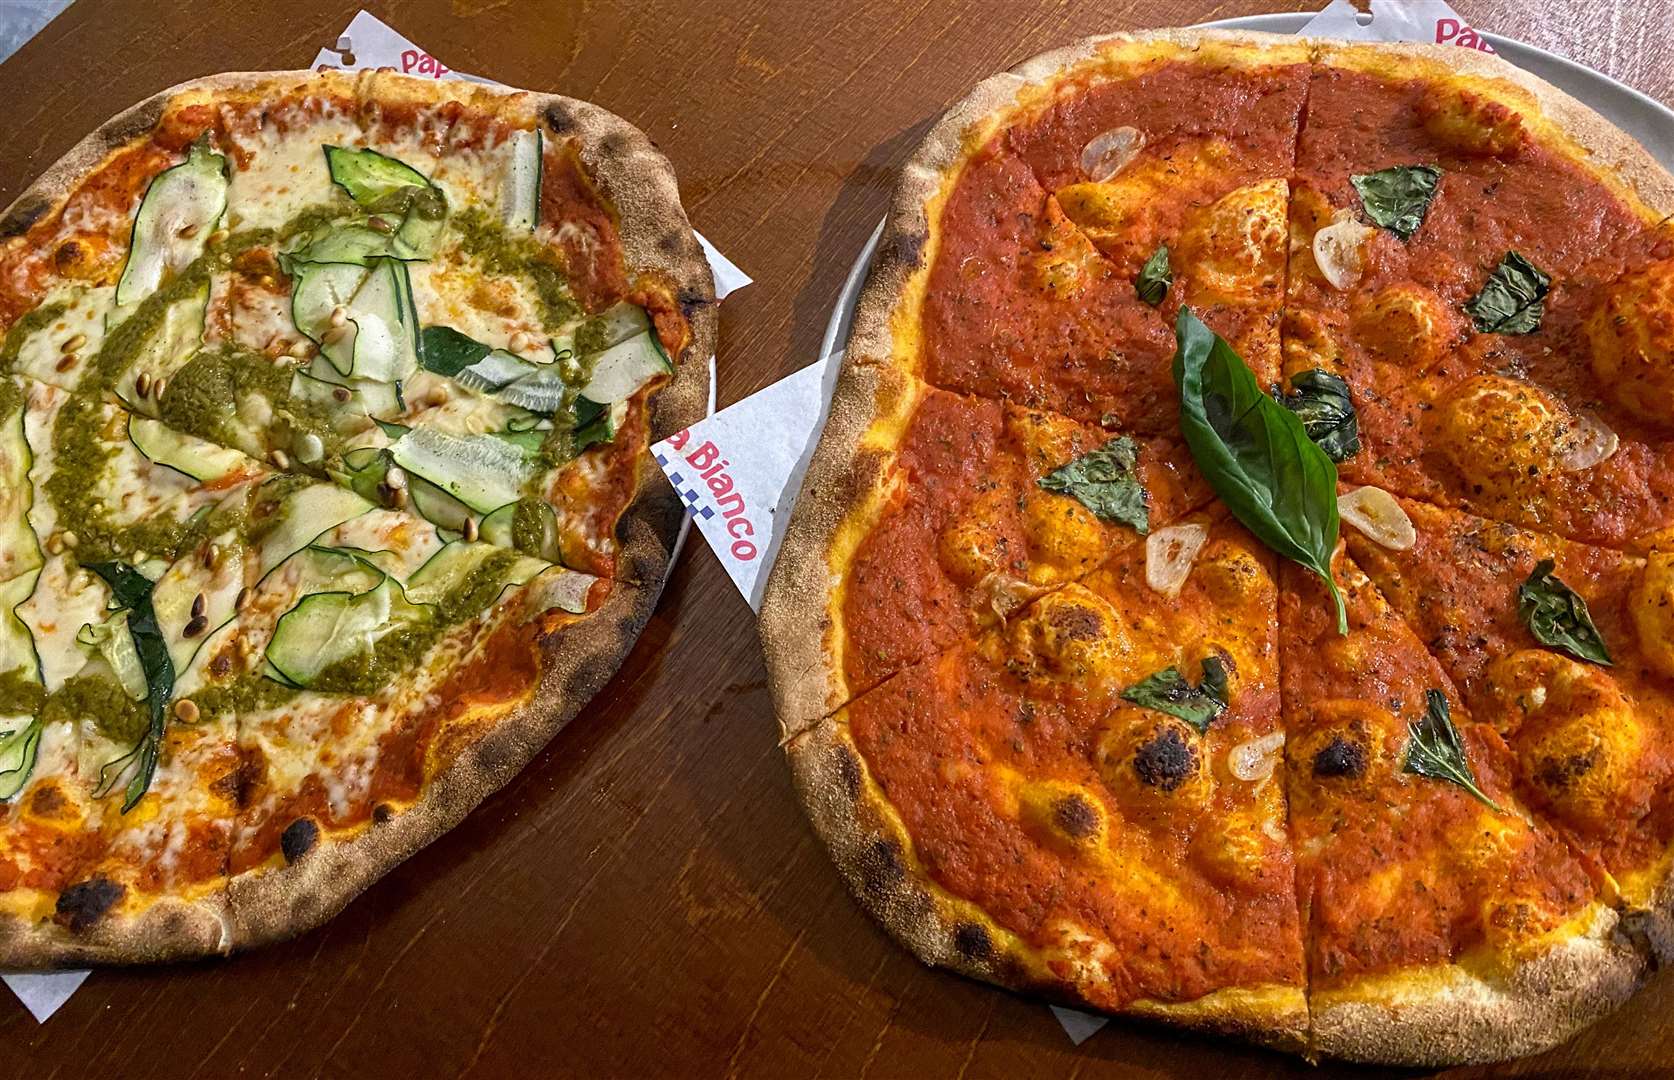 The Courgetto and Marinara pizzas were pre-ordered online and arrived quickly.